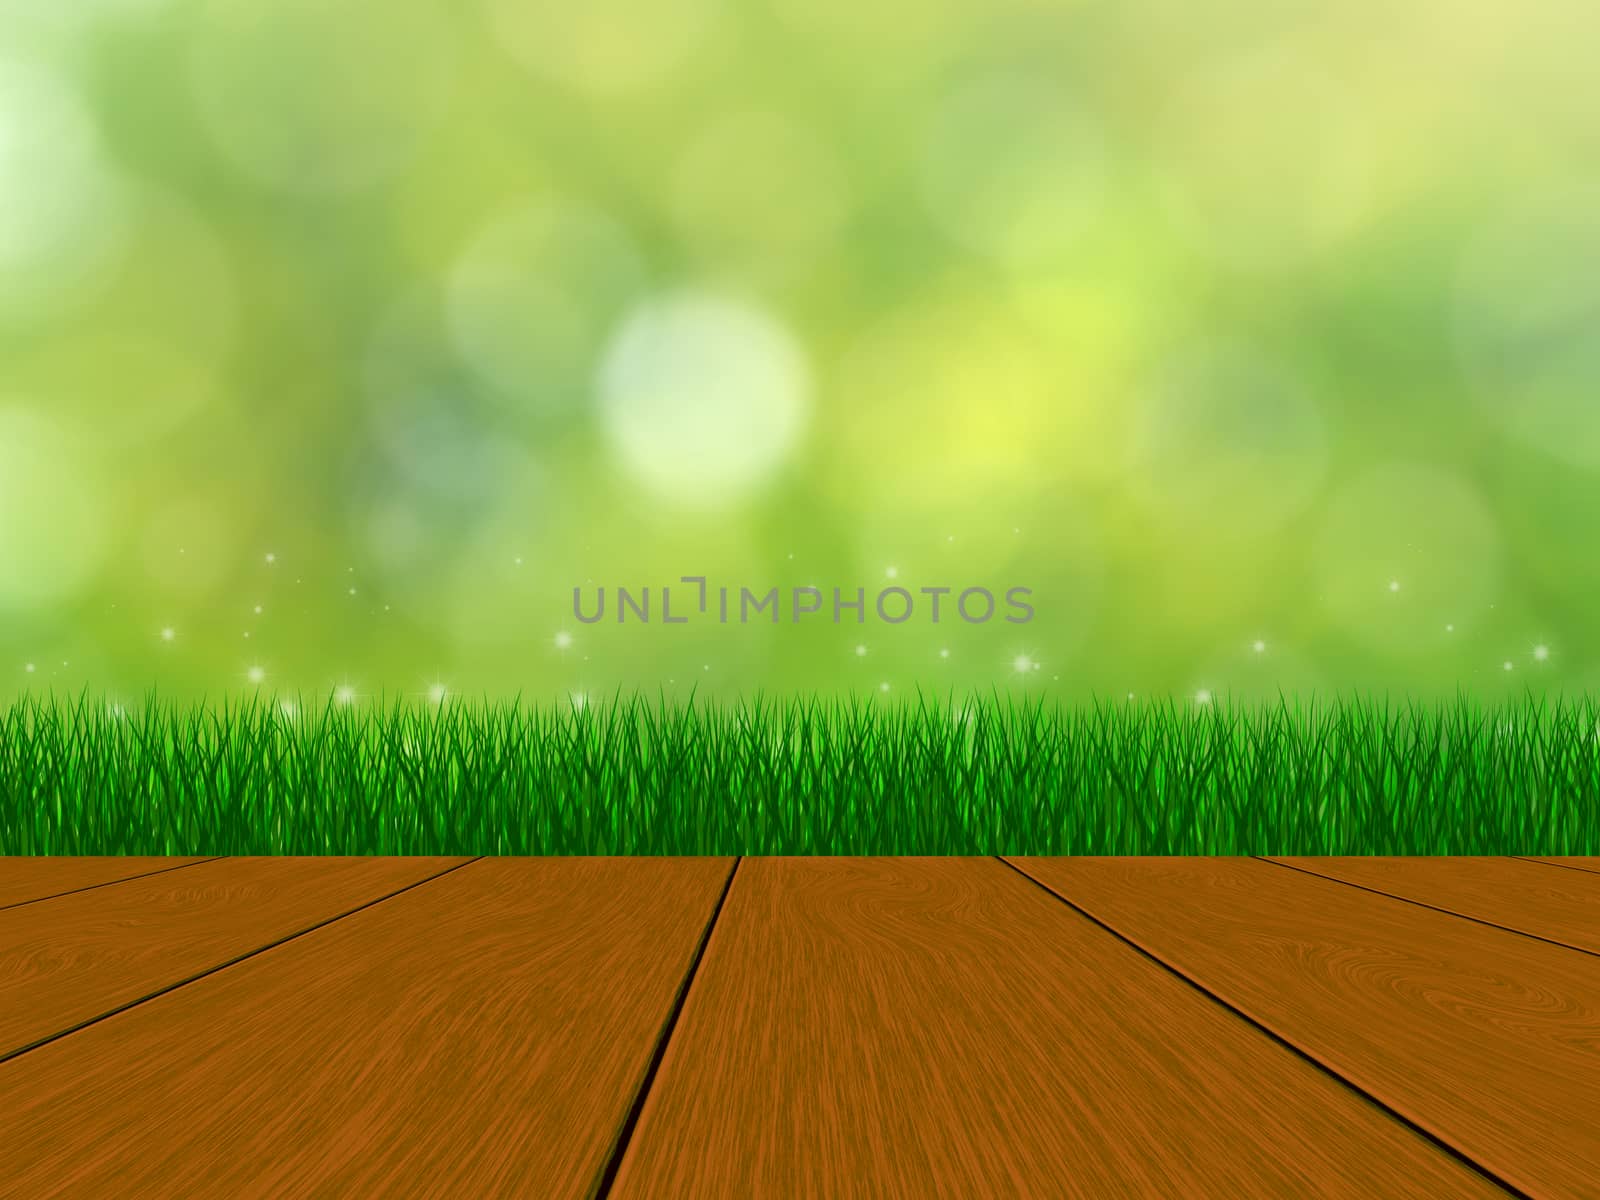 Spring background with wood planks and grass. by GraffiTimi